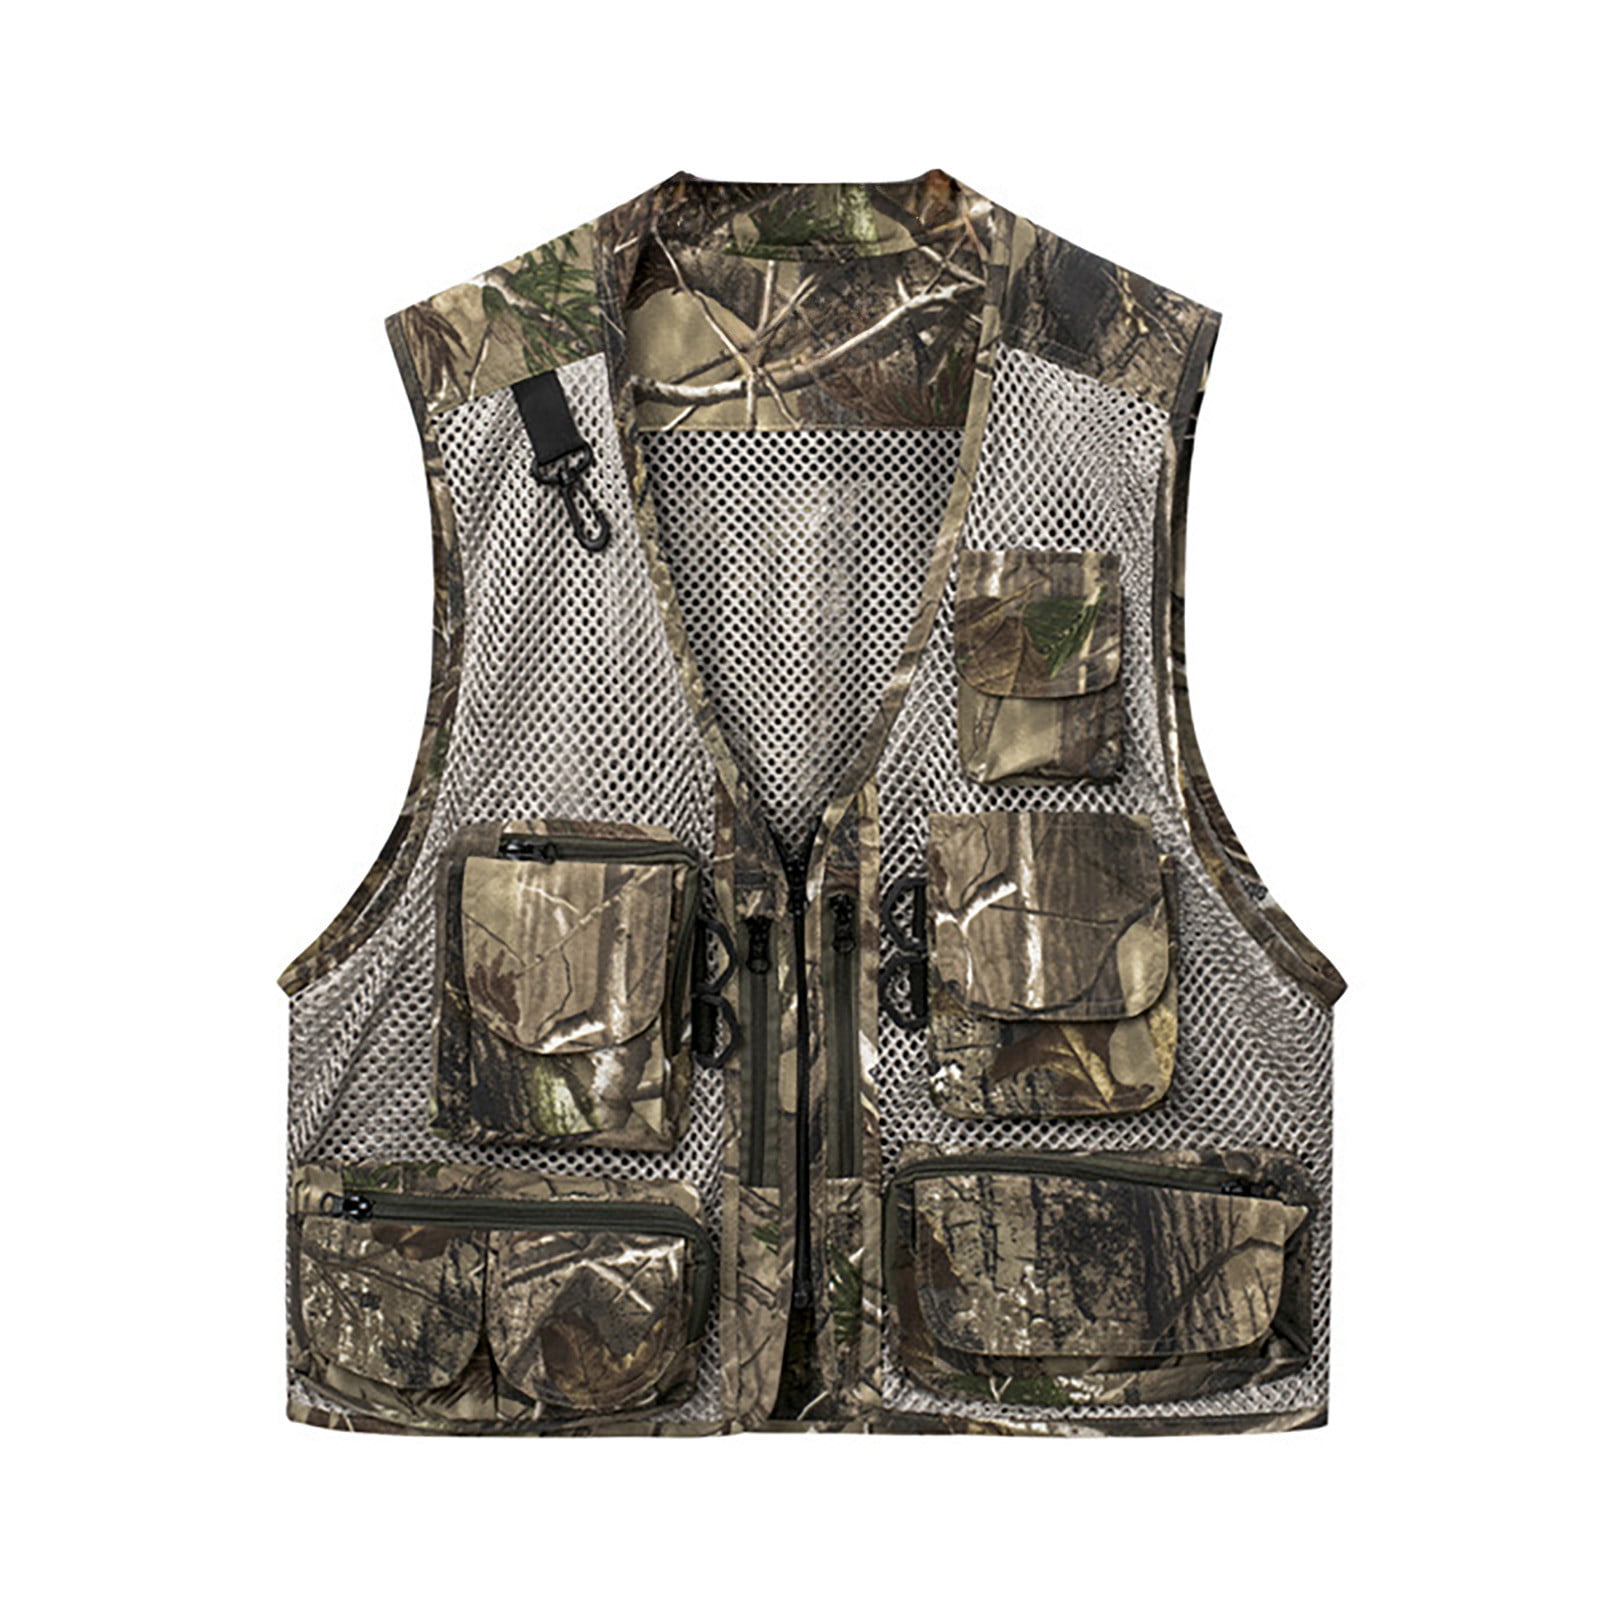 Crystal River Utility Fly Fishing Vest Tan 